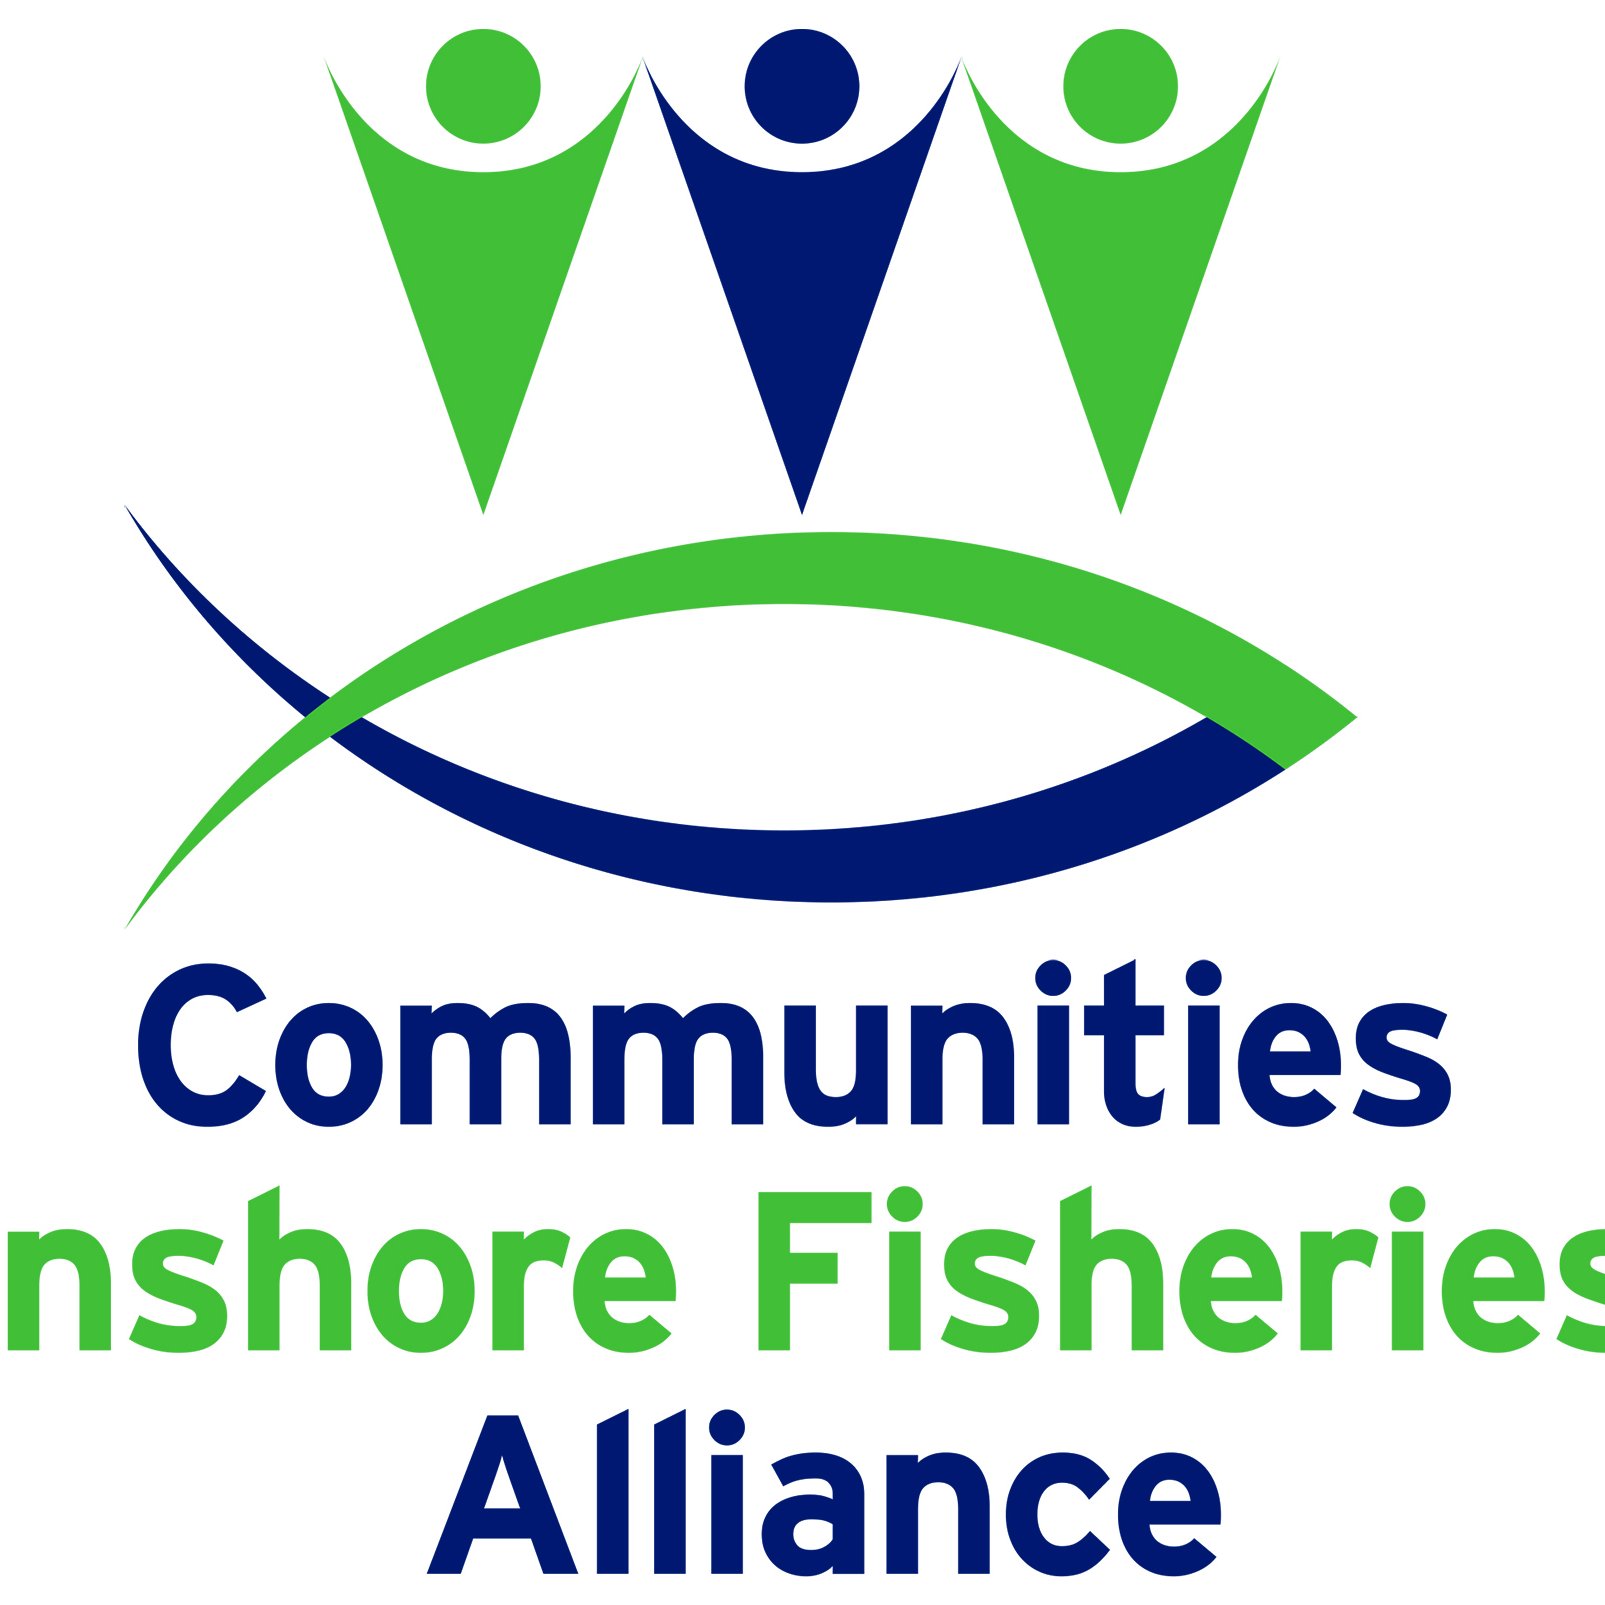 A National Umbrella Alliance Working Around the Coast for Fishing Communities